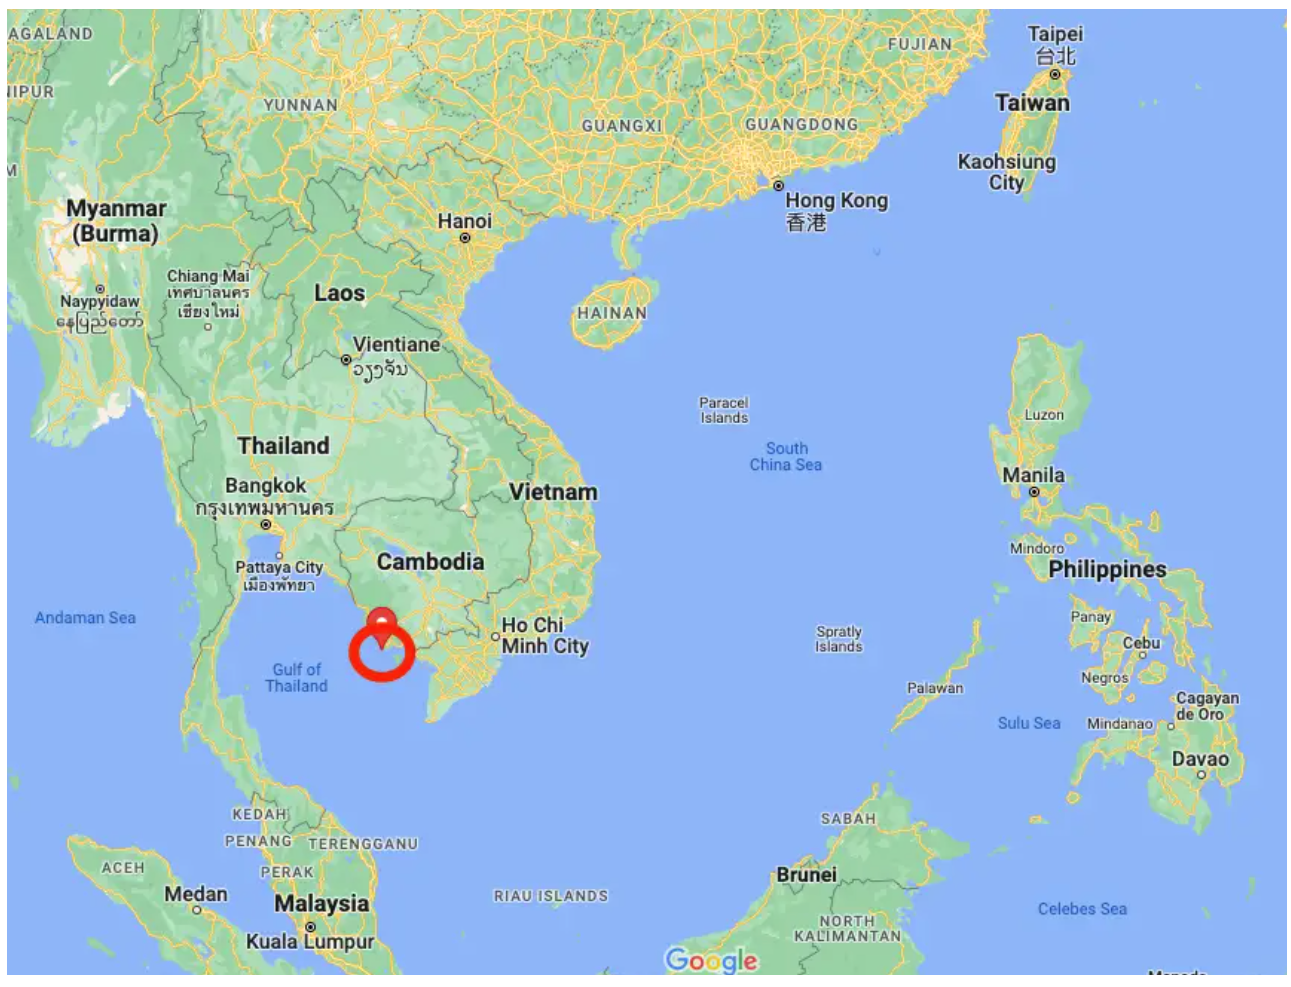 Vietnam spoke out about the information that China built a naval base in Cambodia - Photo 1.